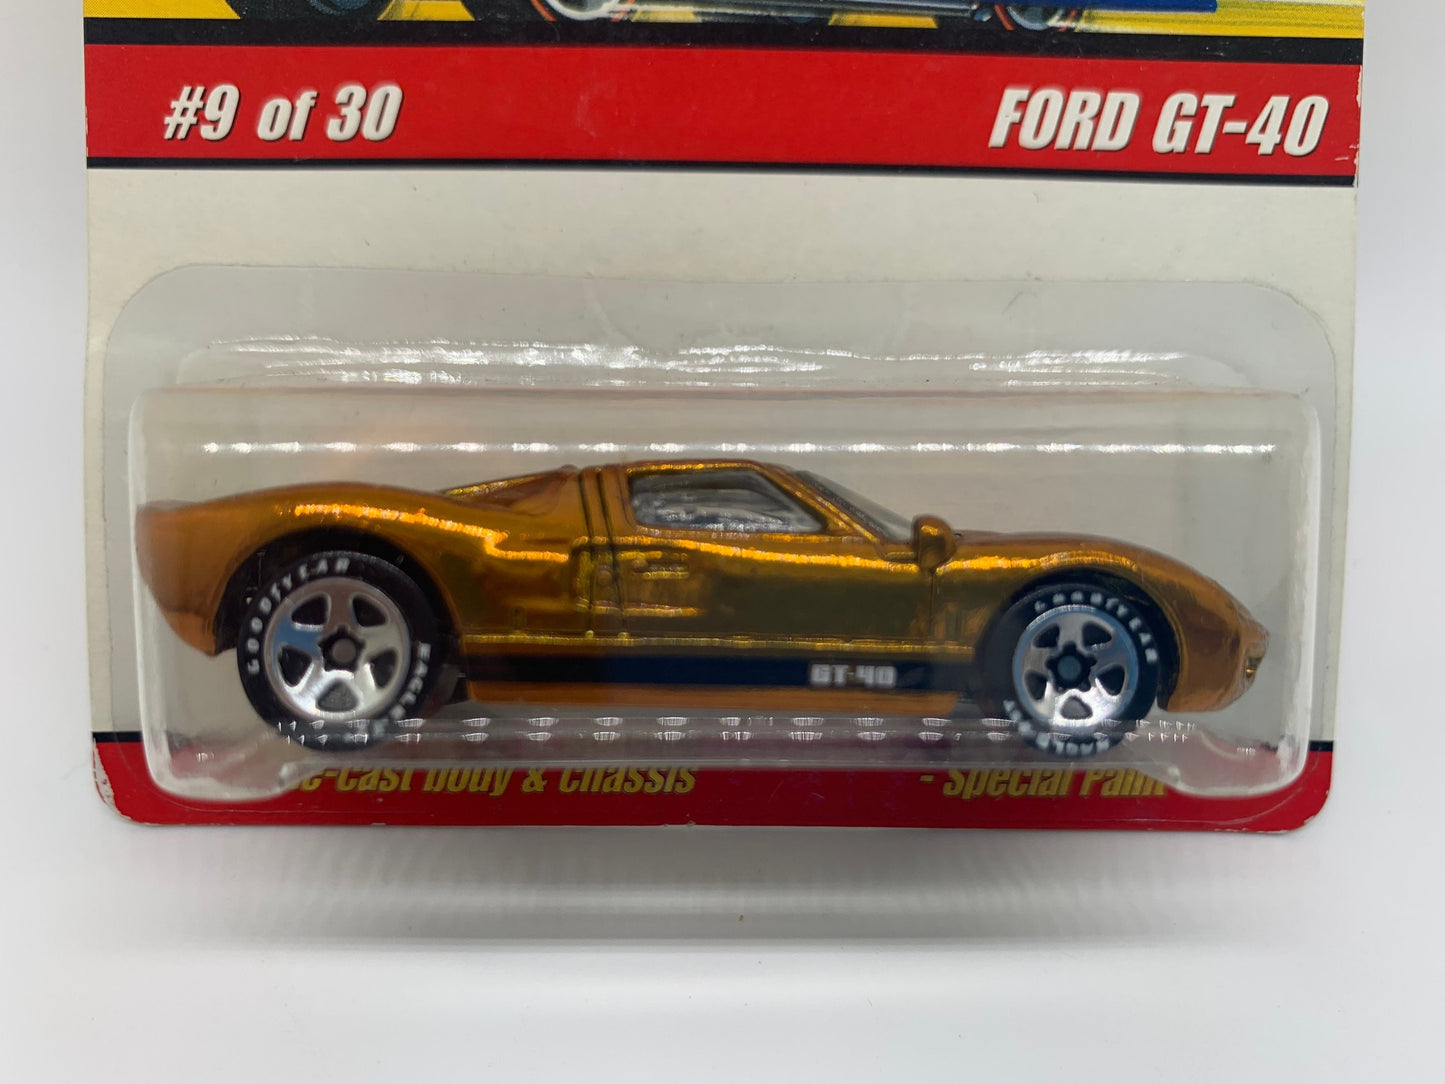 Hot Wheels Ford GT40 Spectraflame Gold Hot Wheels Classics Series 2 Perfect Birthday Gift Miniature Collectable Model Toy Car